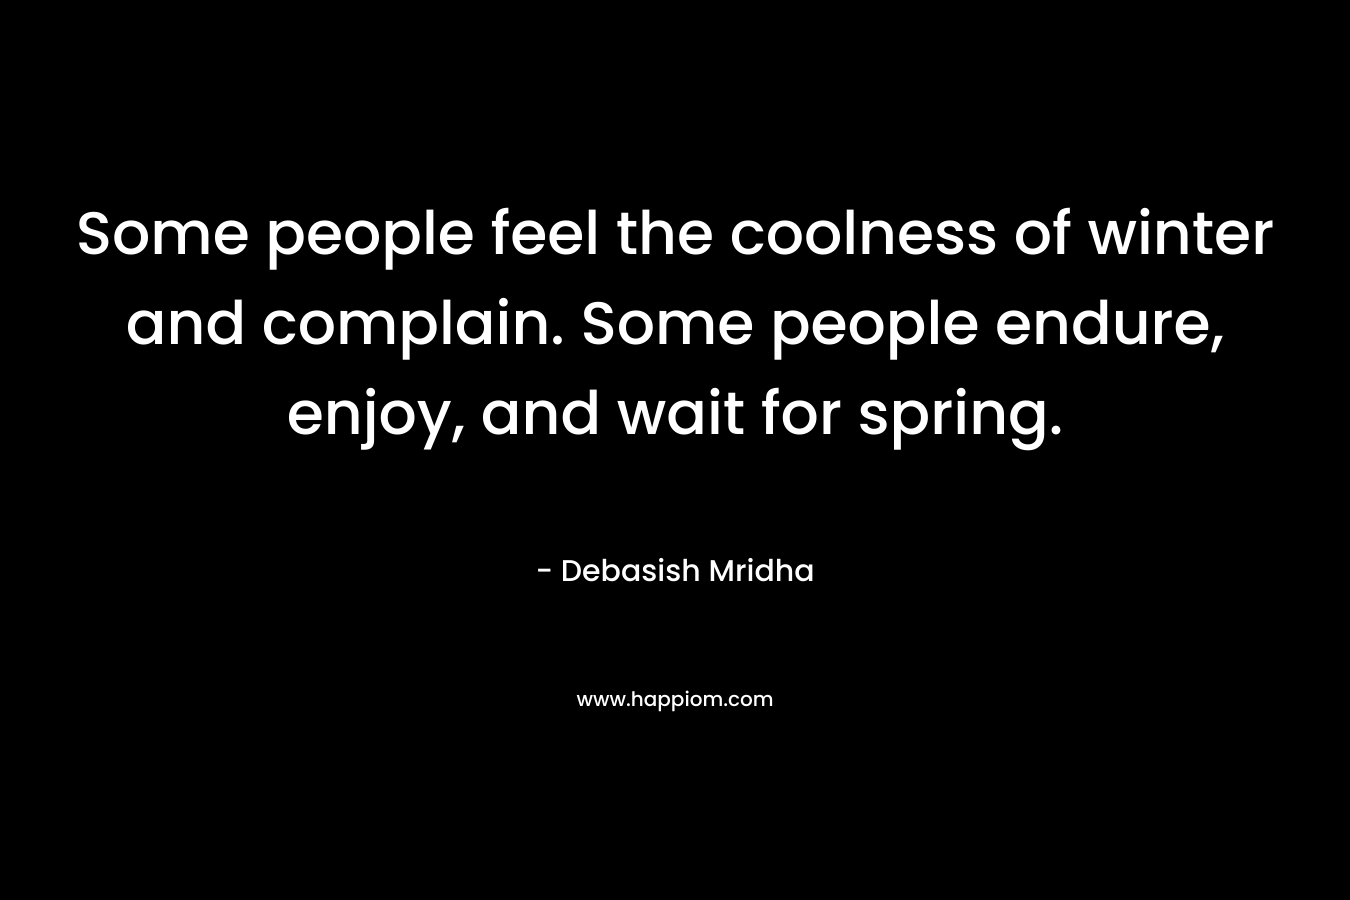 Some people feel the coolness of winter and complain. Some people endure, enjoy, and wait for spring. – Debasish Mridha